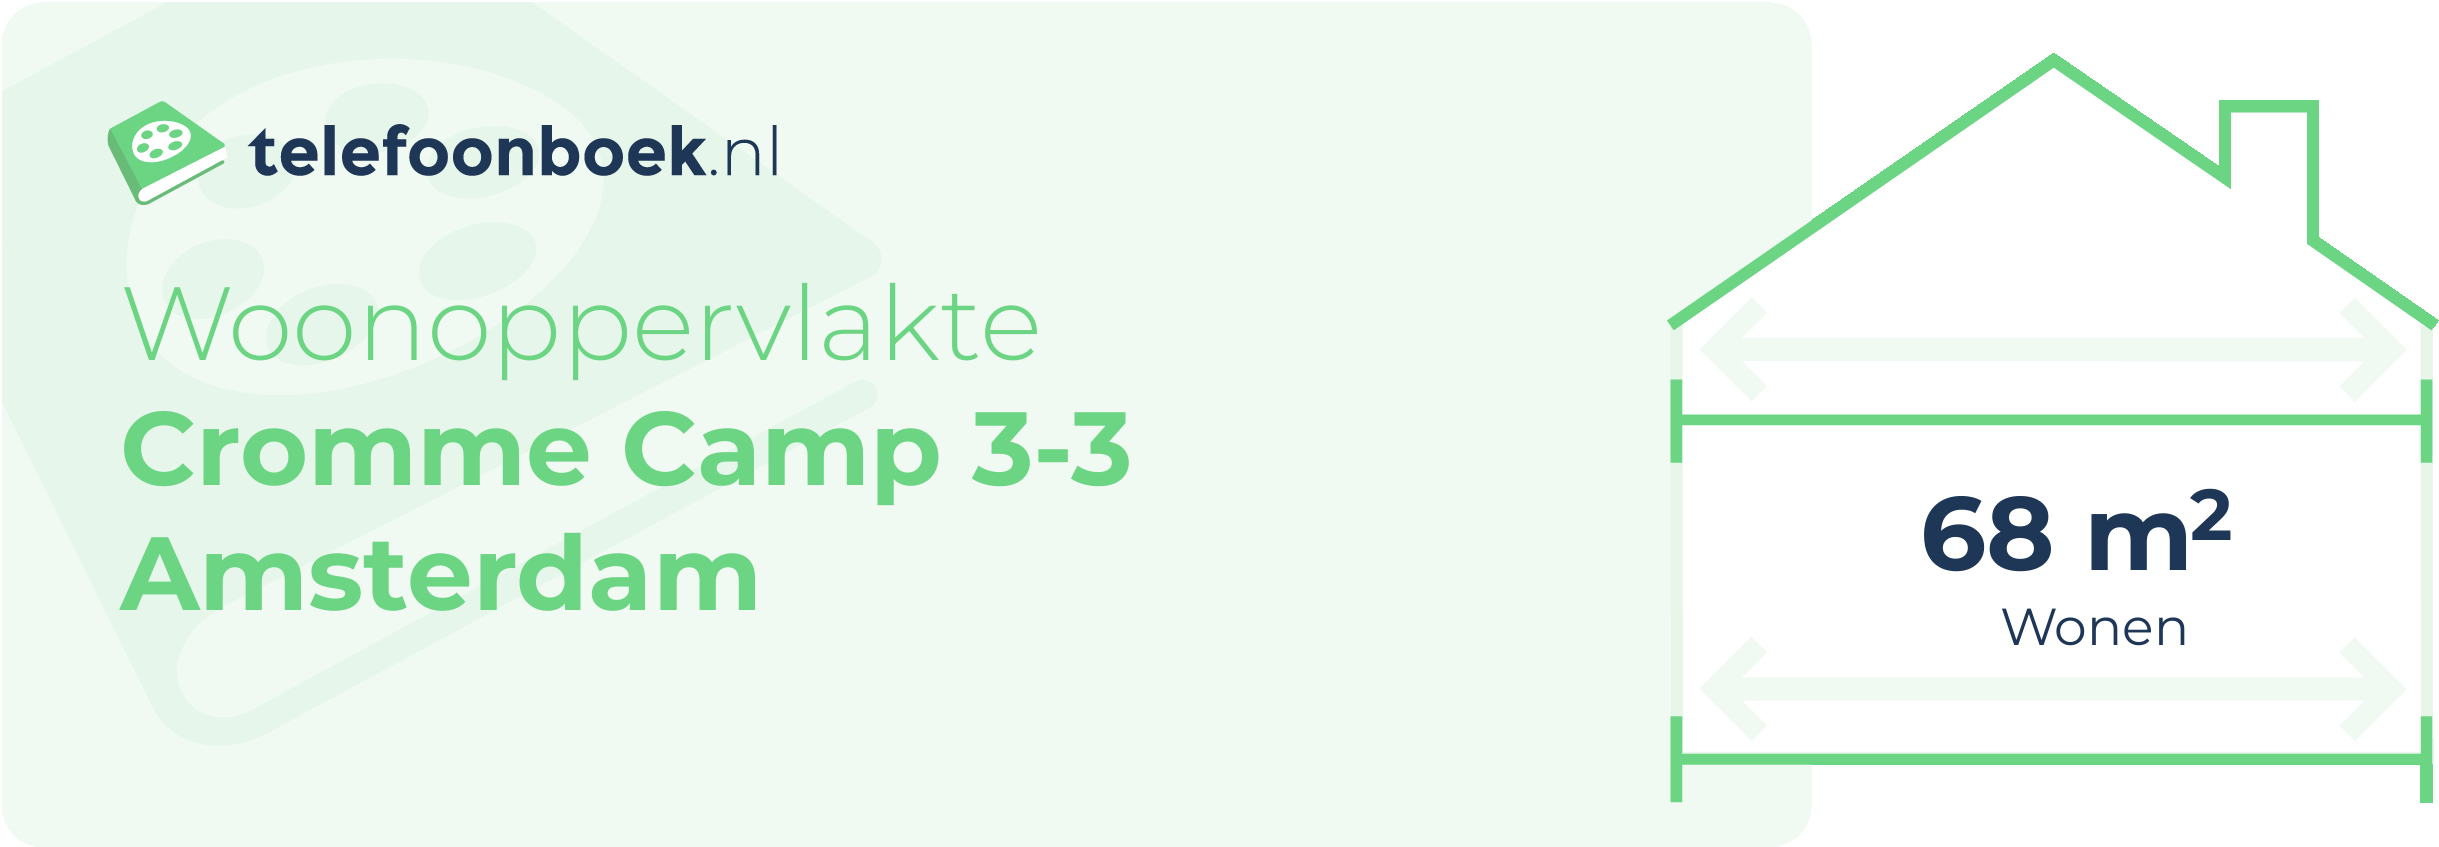 Woonoppervlakte Cromme Camp 3-3 Amsterdam